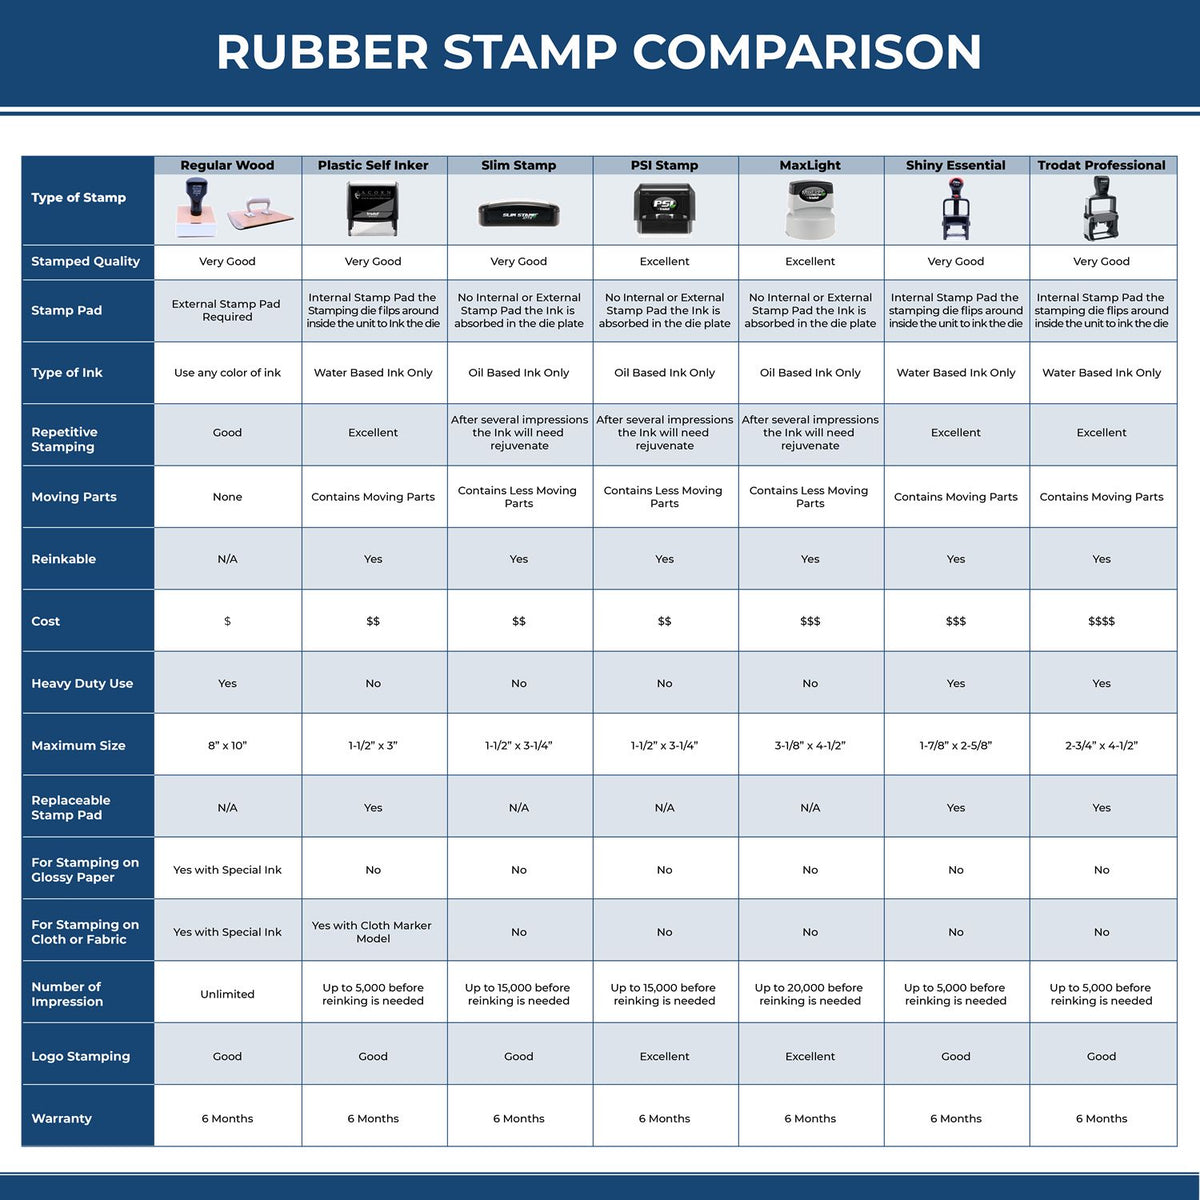 Large Self Inking Wire Transfer Stamp 4588S Rubber Stamp Comparison